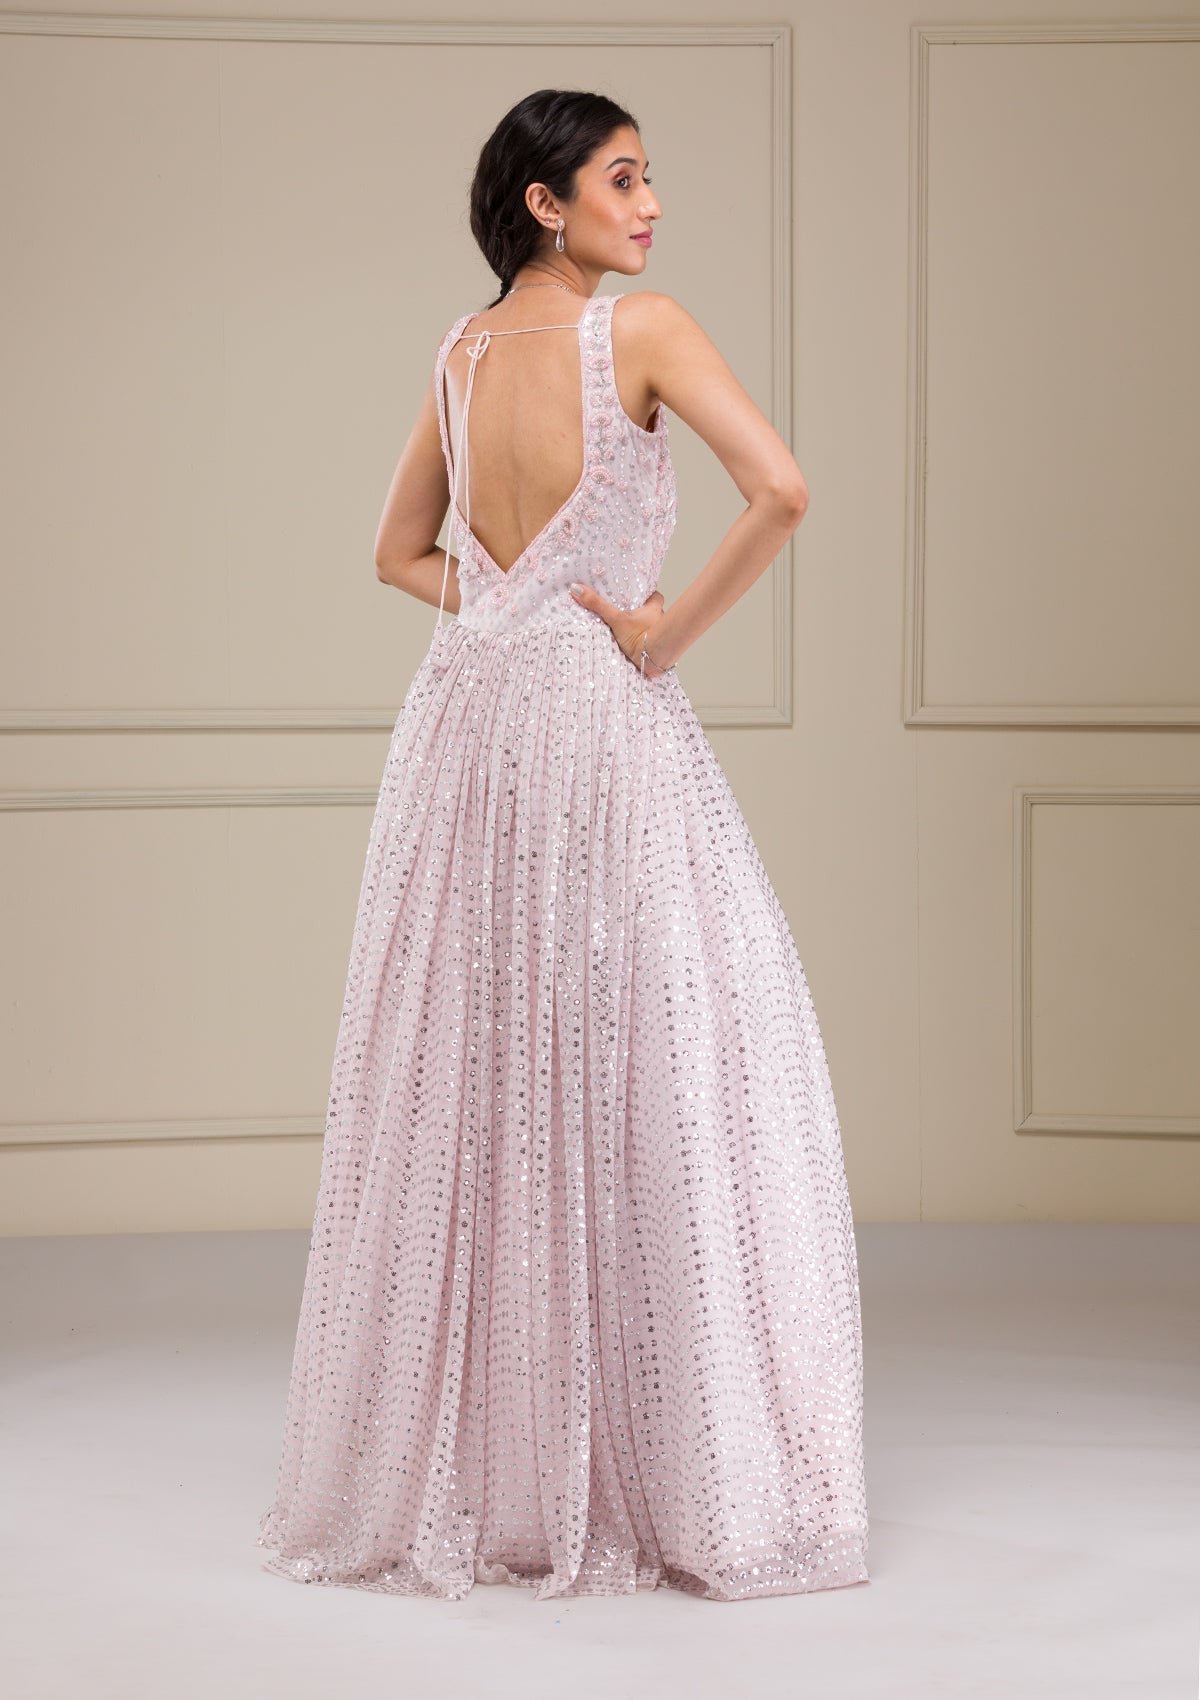 Baby Pink Cutdana Net Gown